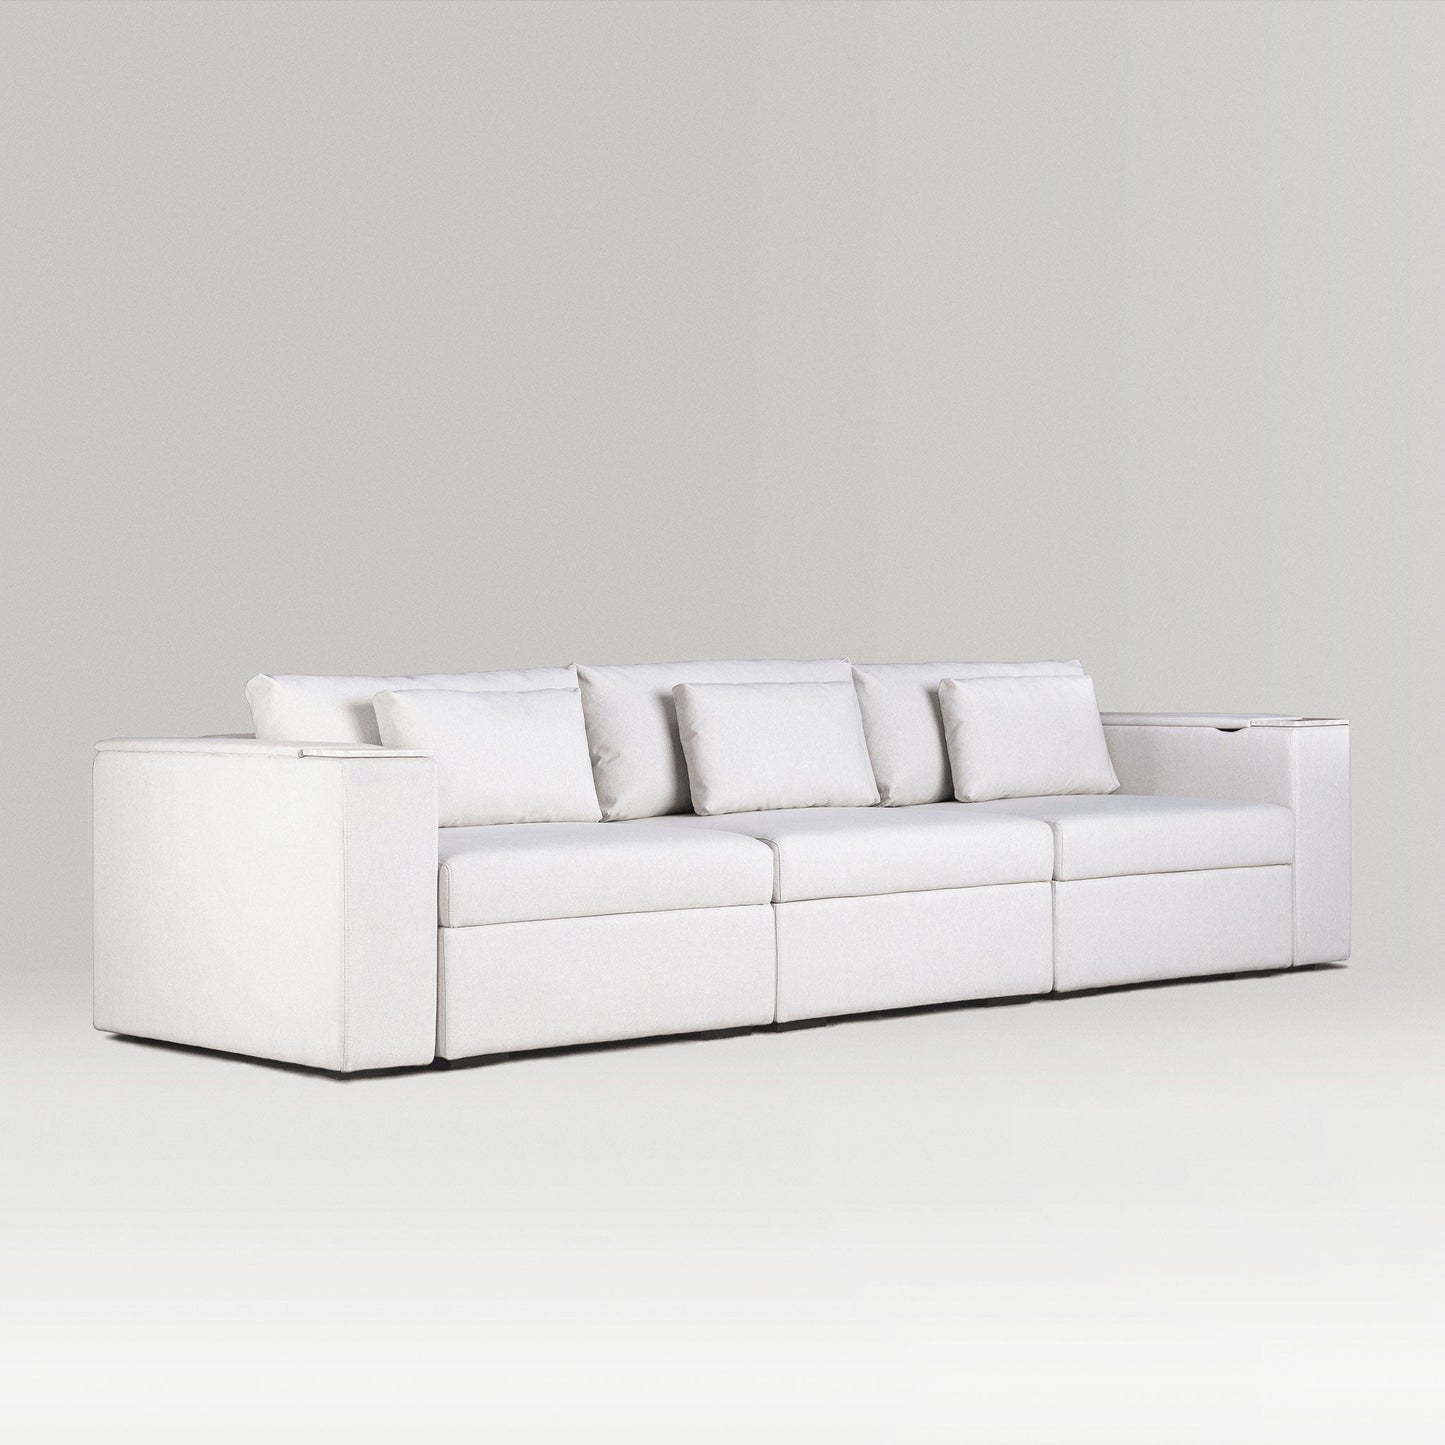   Rezy Design Sofa Store's Three-Seater Sectional Sofa designed to furnish homes.